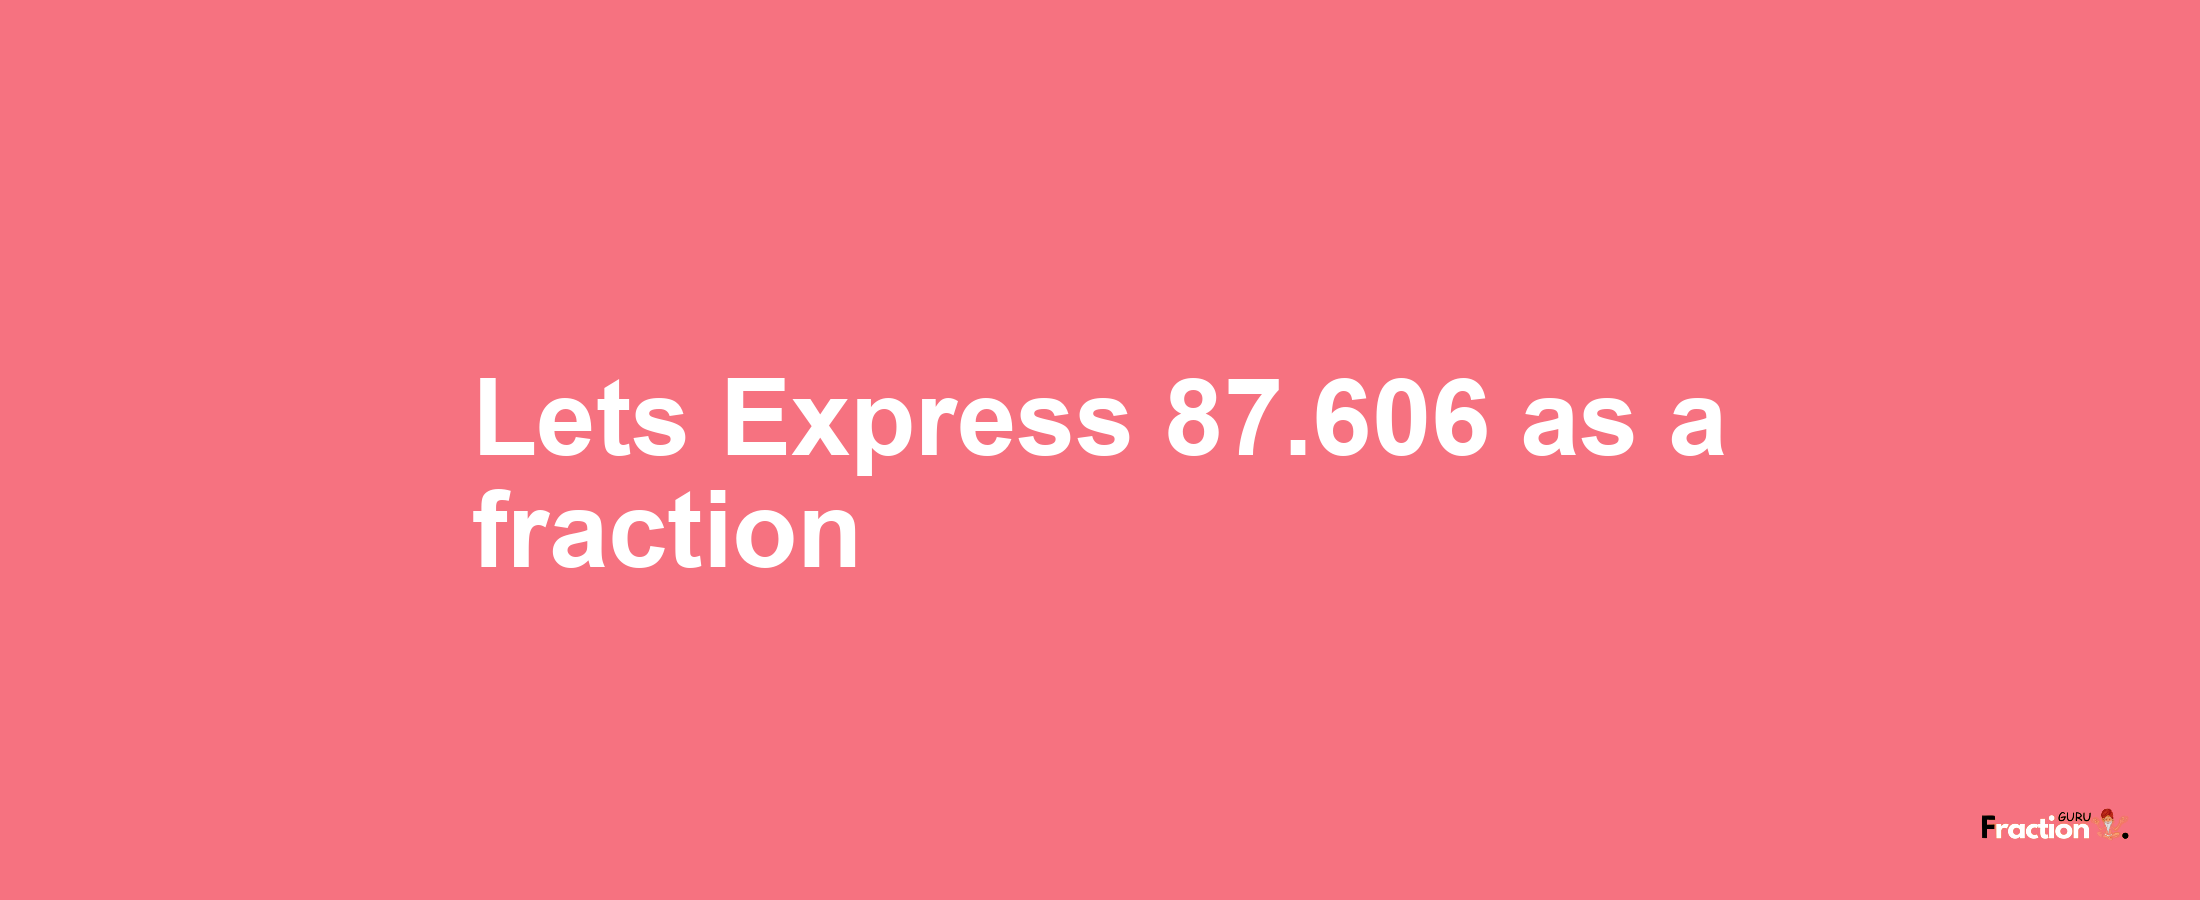 Lets Express 87.606 as afraction